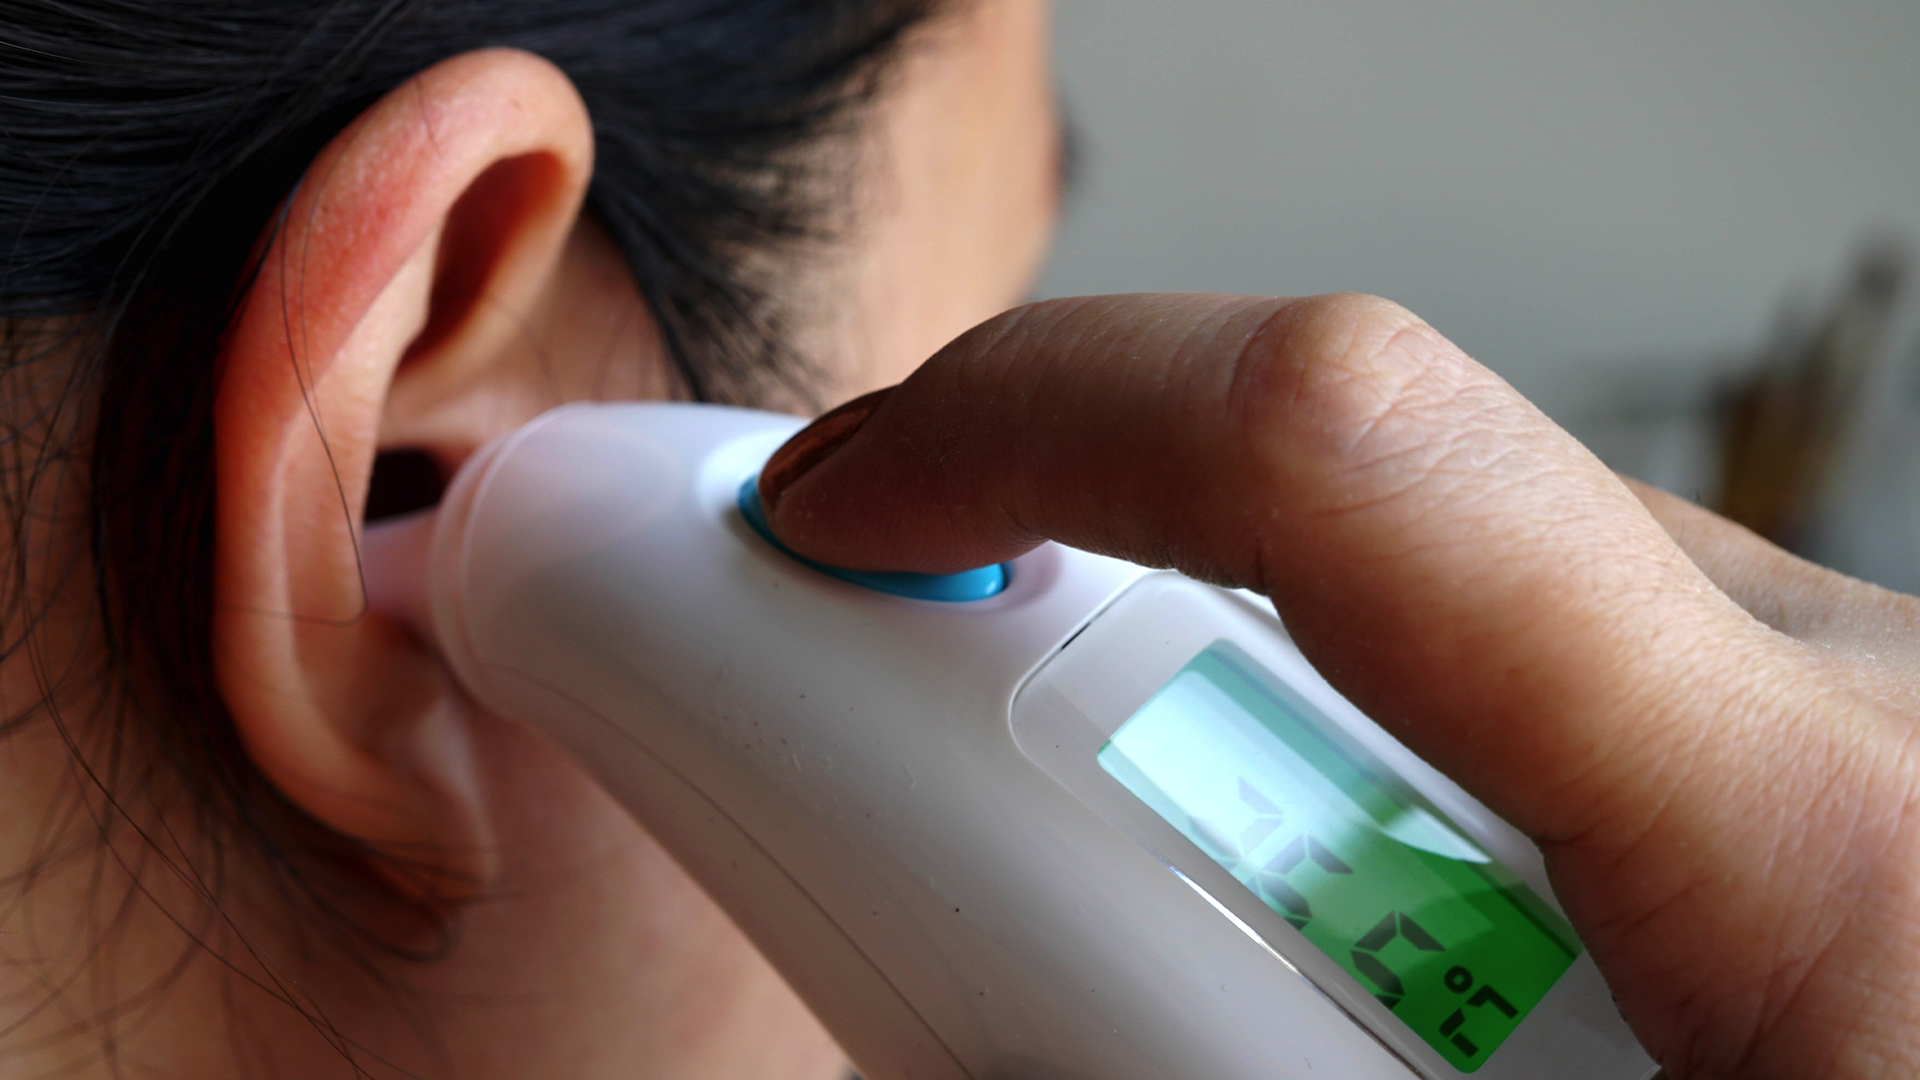 An adult using an ear thermometer on themselves.